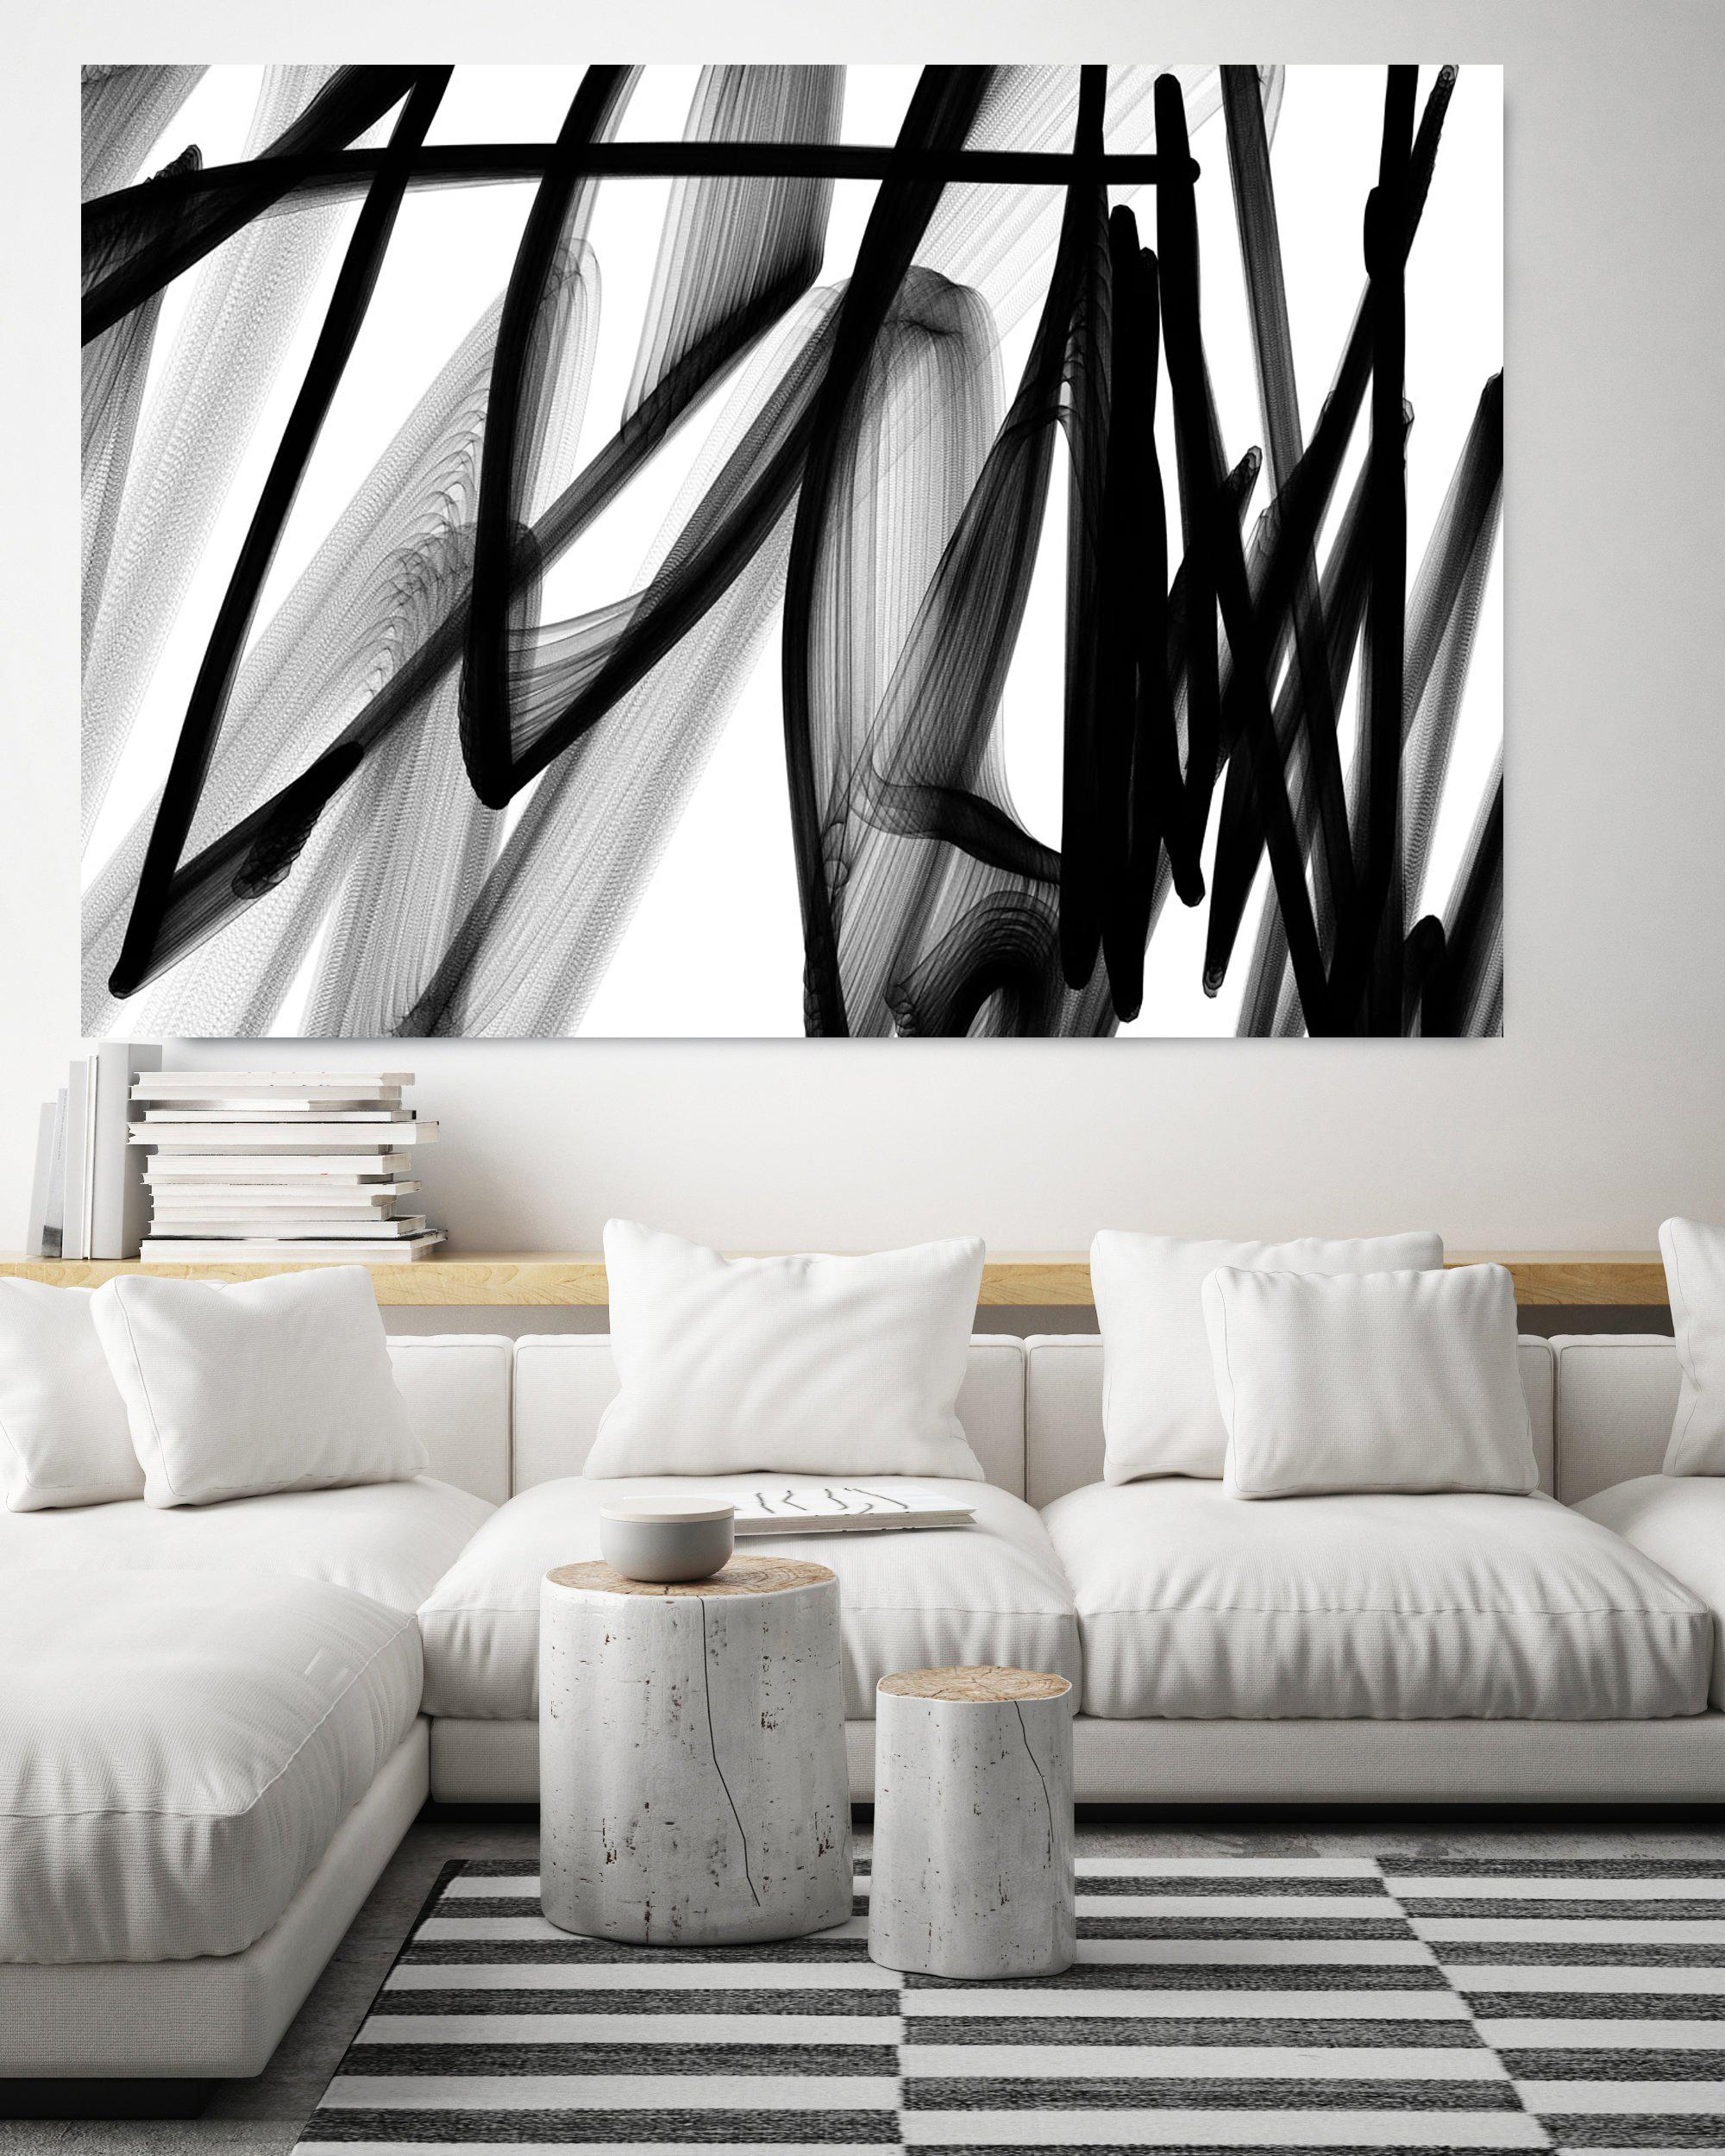 Black & White Contemporary Abstract Painting on Canvas, The Wind, New Media - Minimalist Mixed Media Art by Irena Orlov